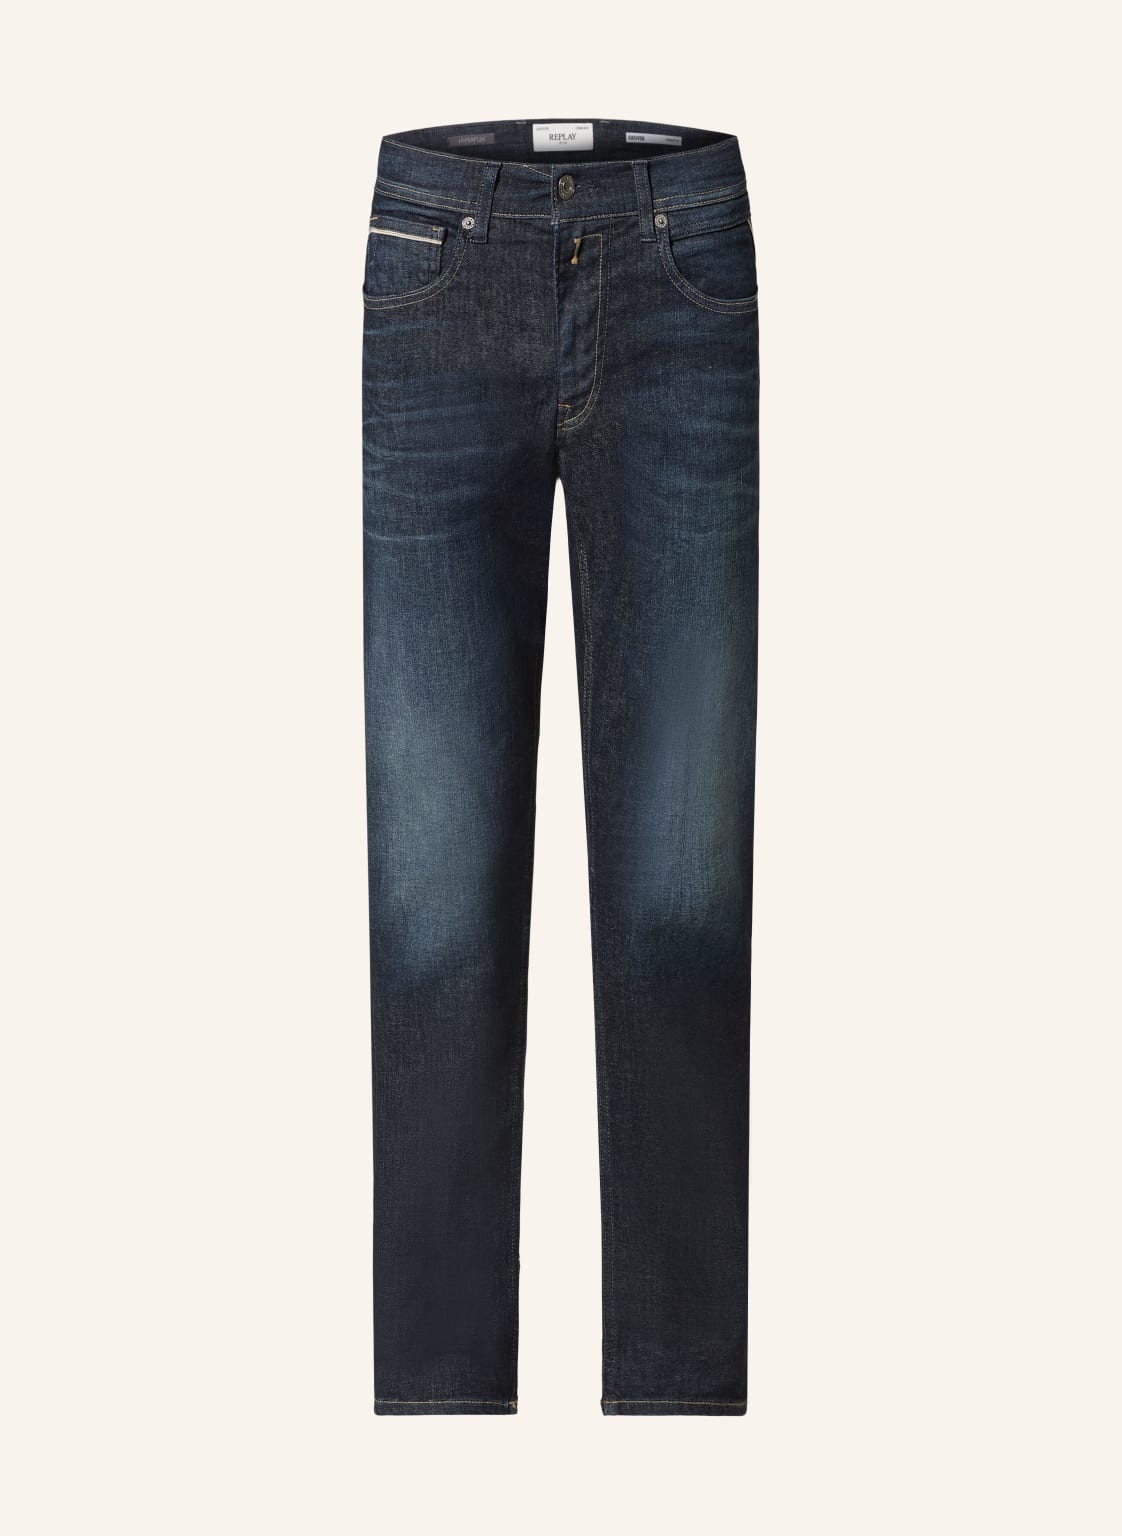 Replay Jeans Grover Standard Fit blau von Replay